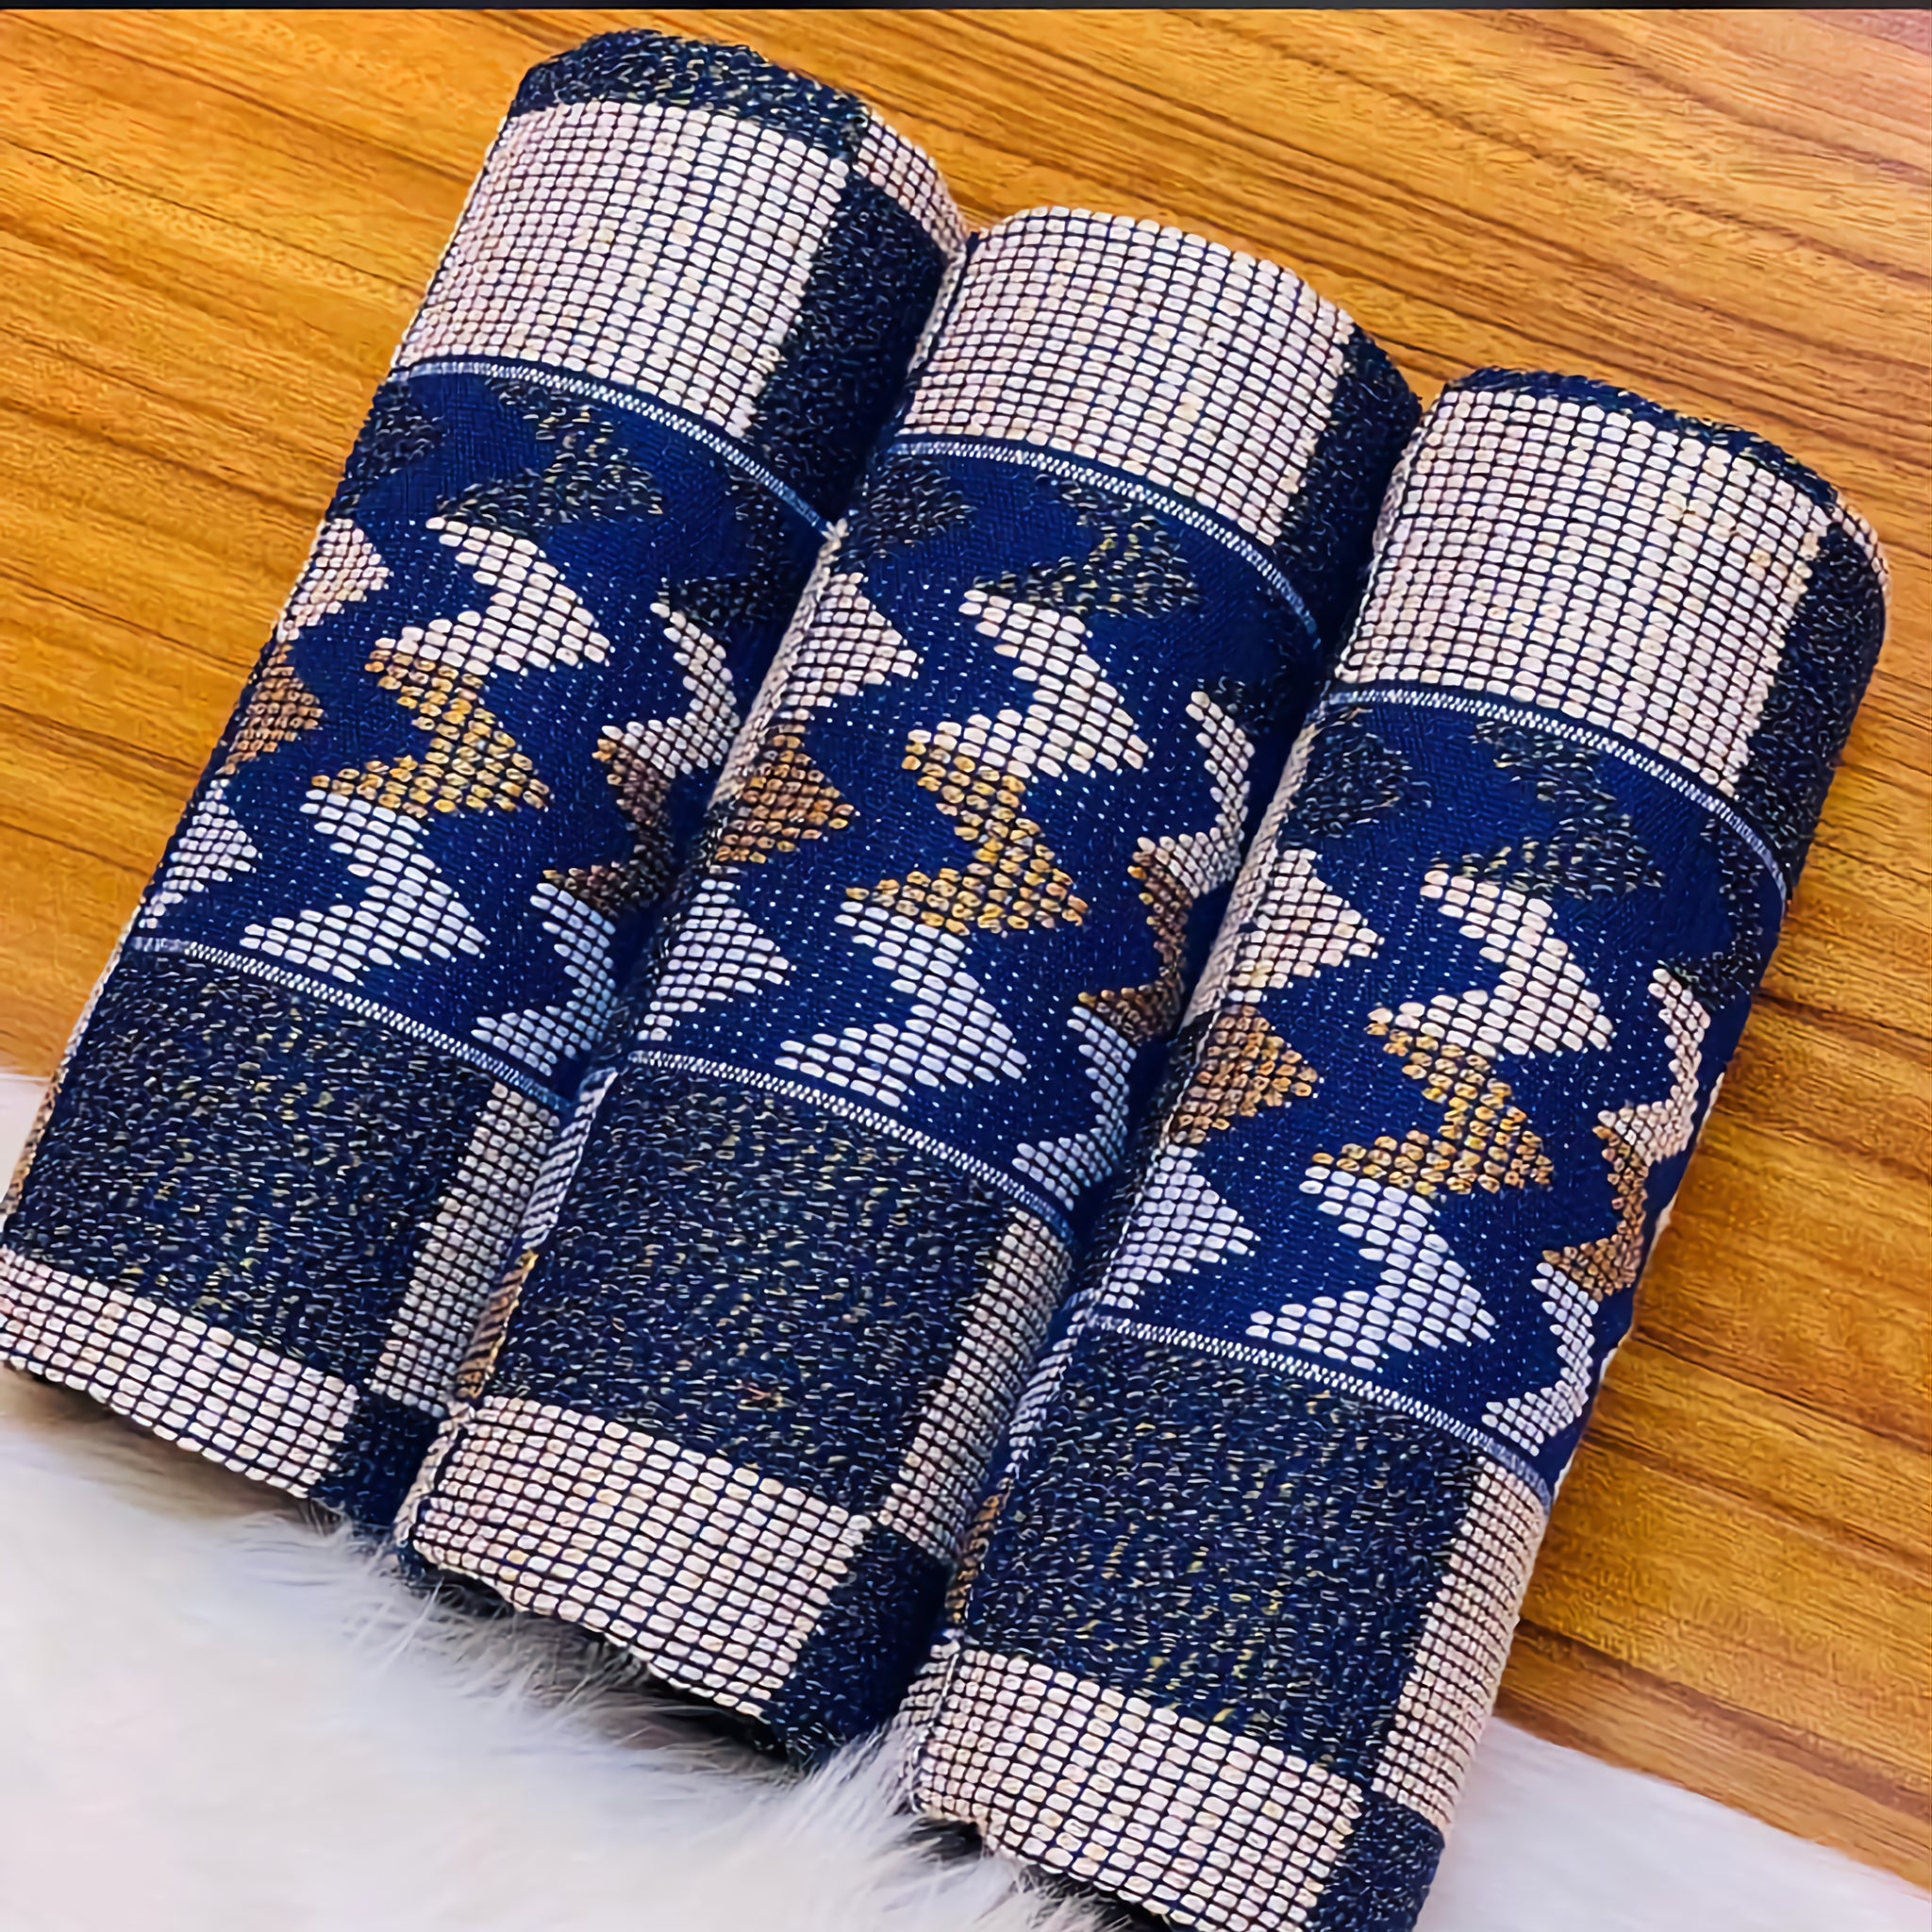 MG Authentic Hand Weaved Kente Cloth A2442